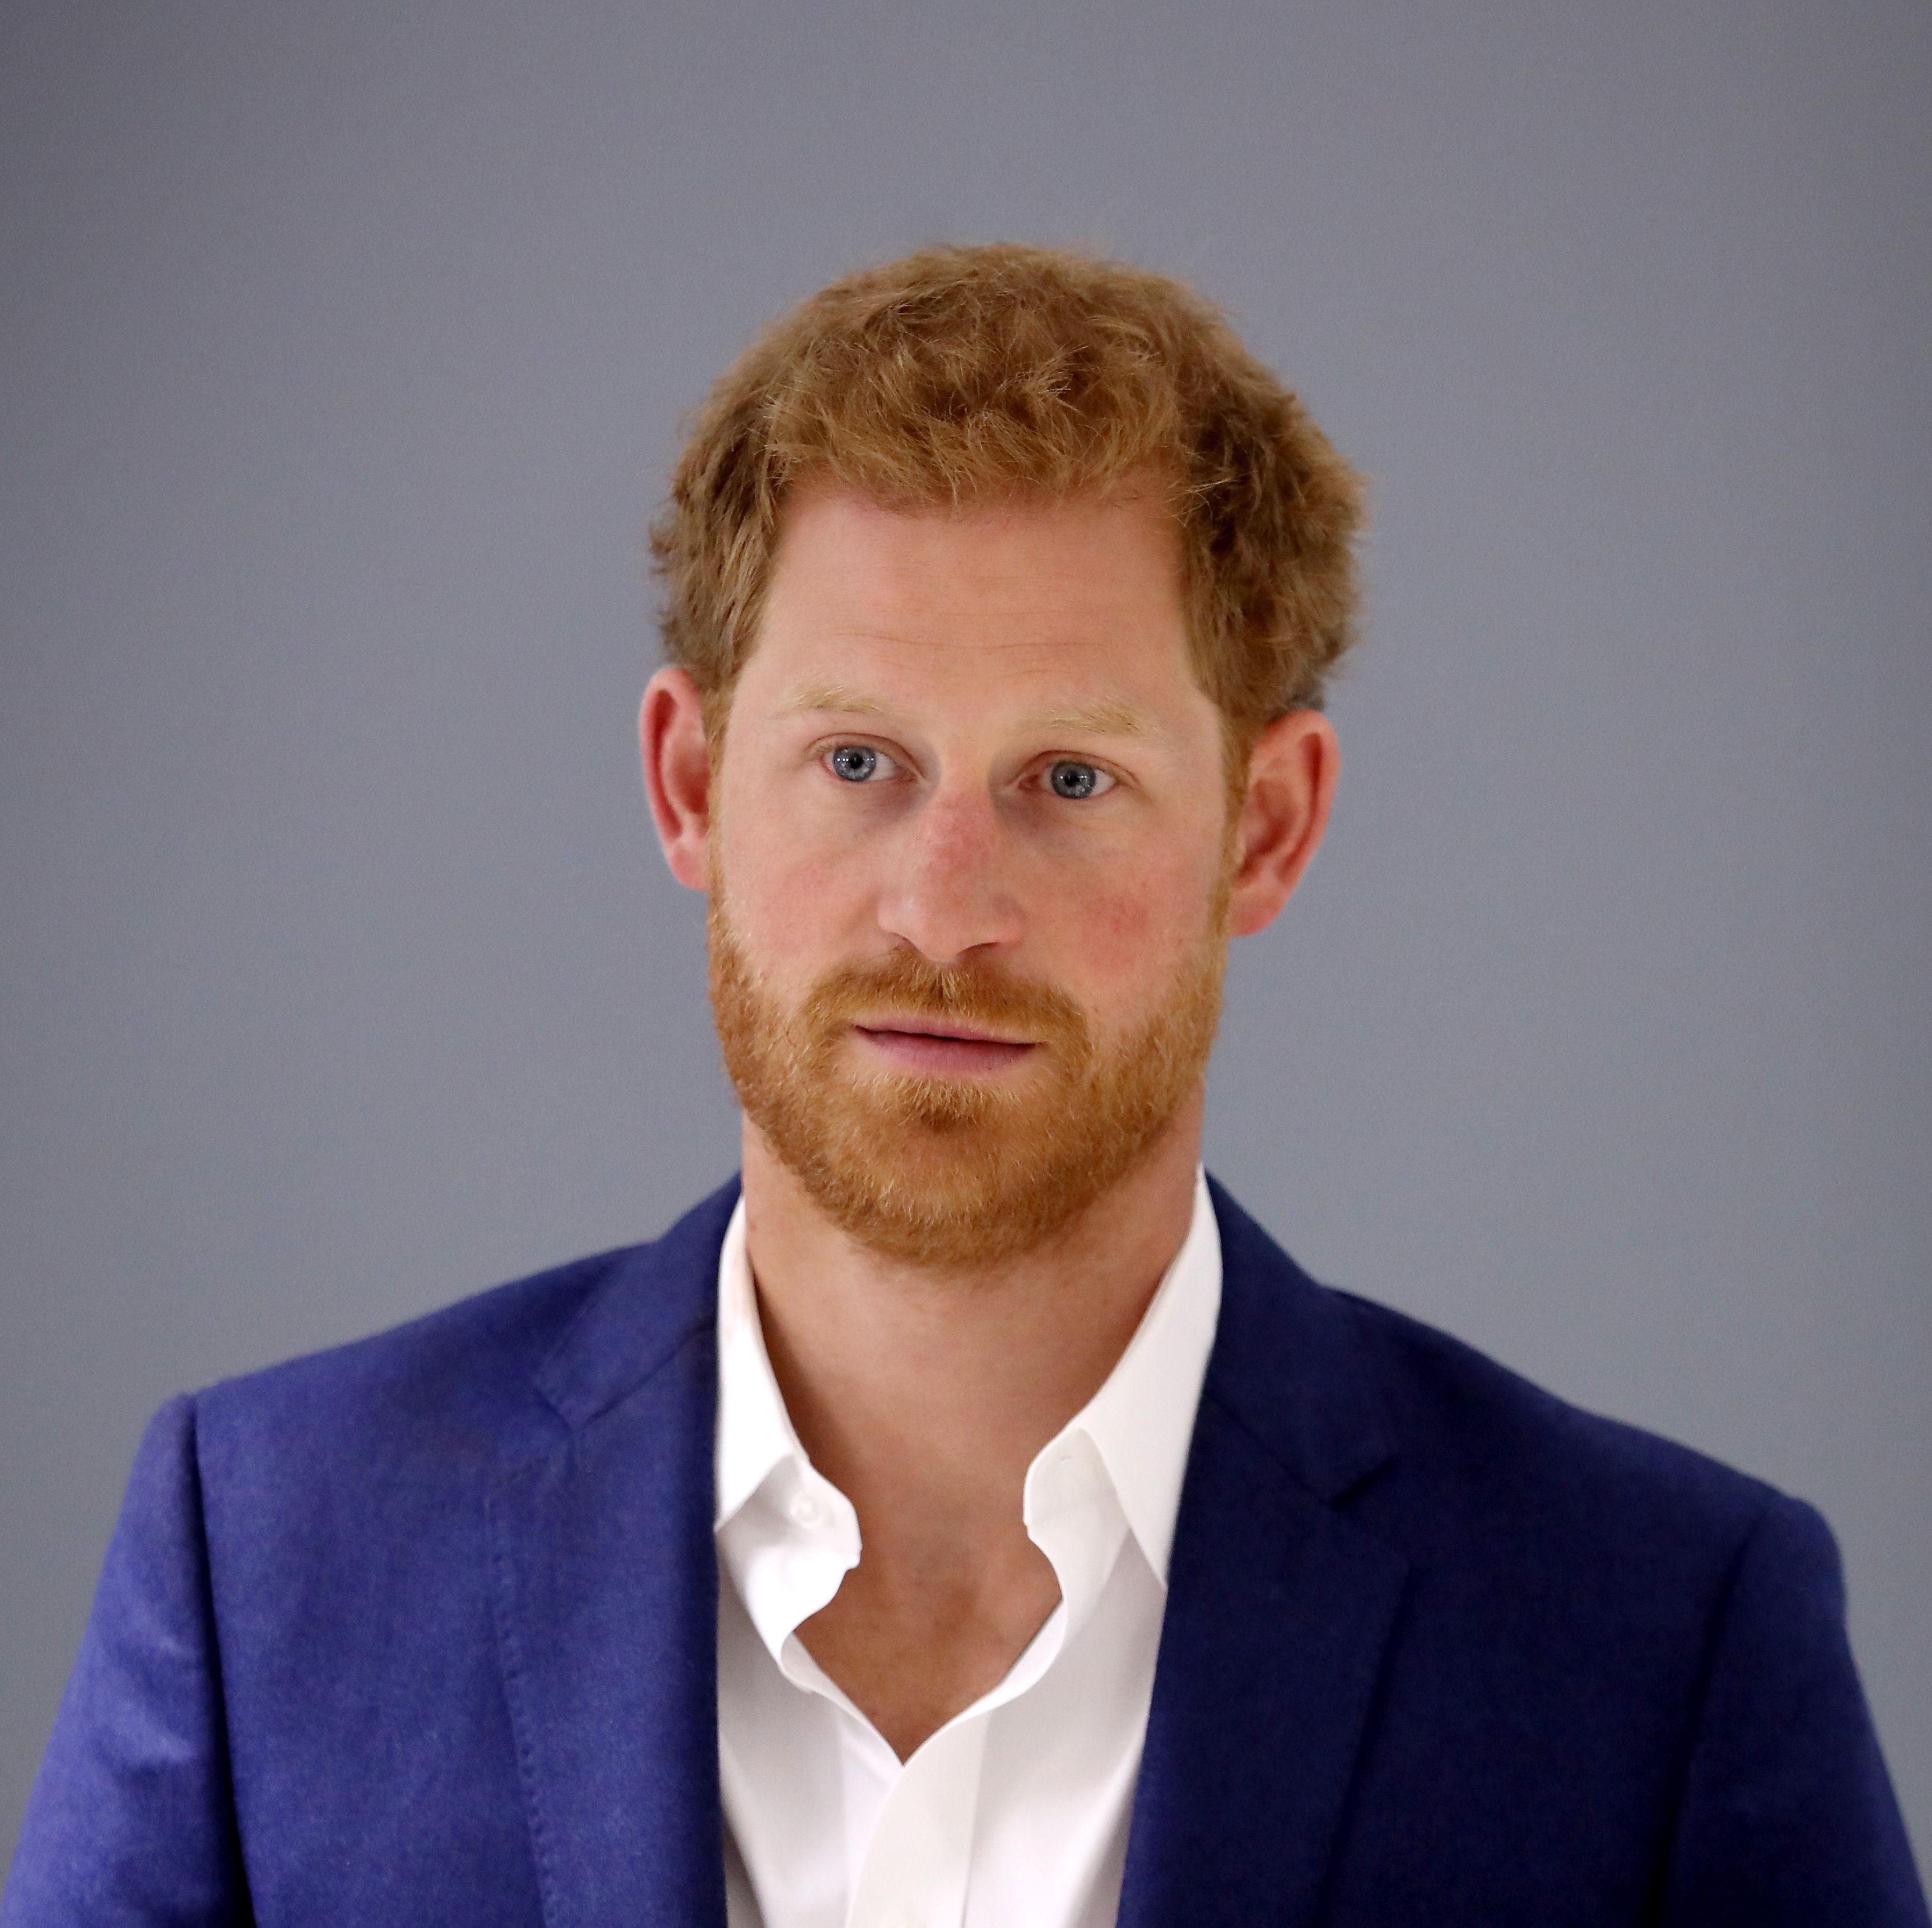 What Prince Harry Didn't Say Was The Real Story in His Latest Television Interview